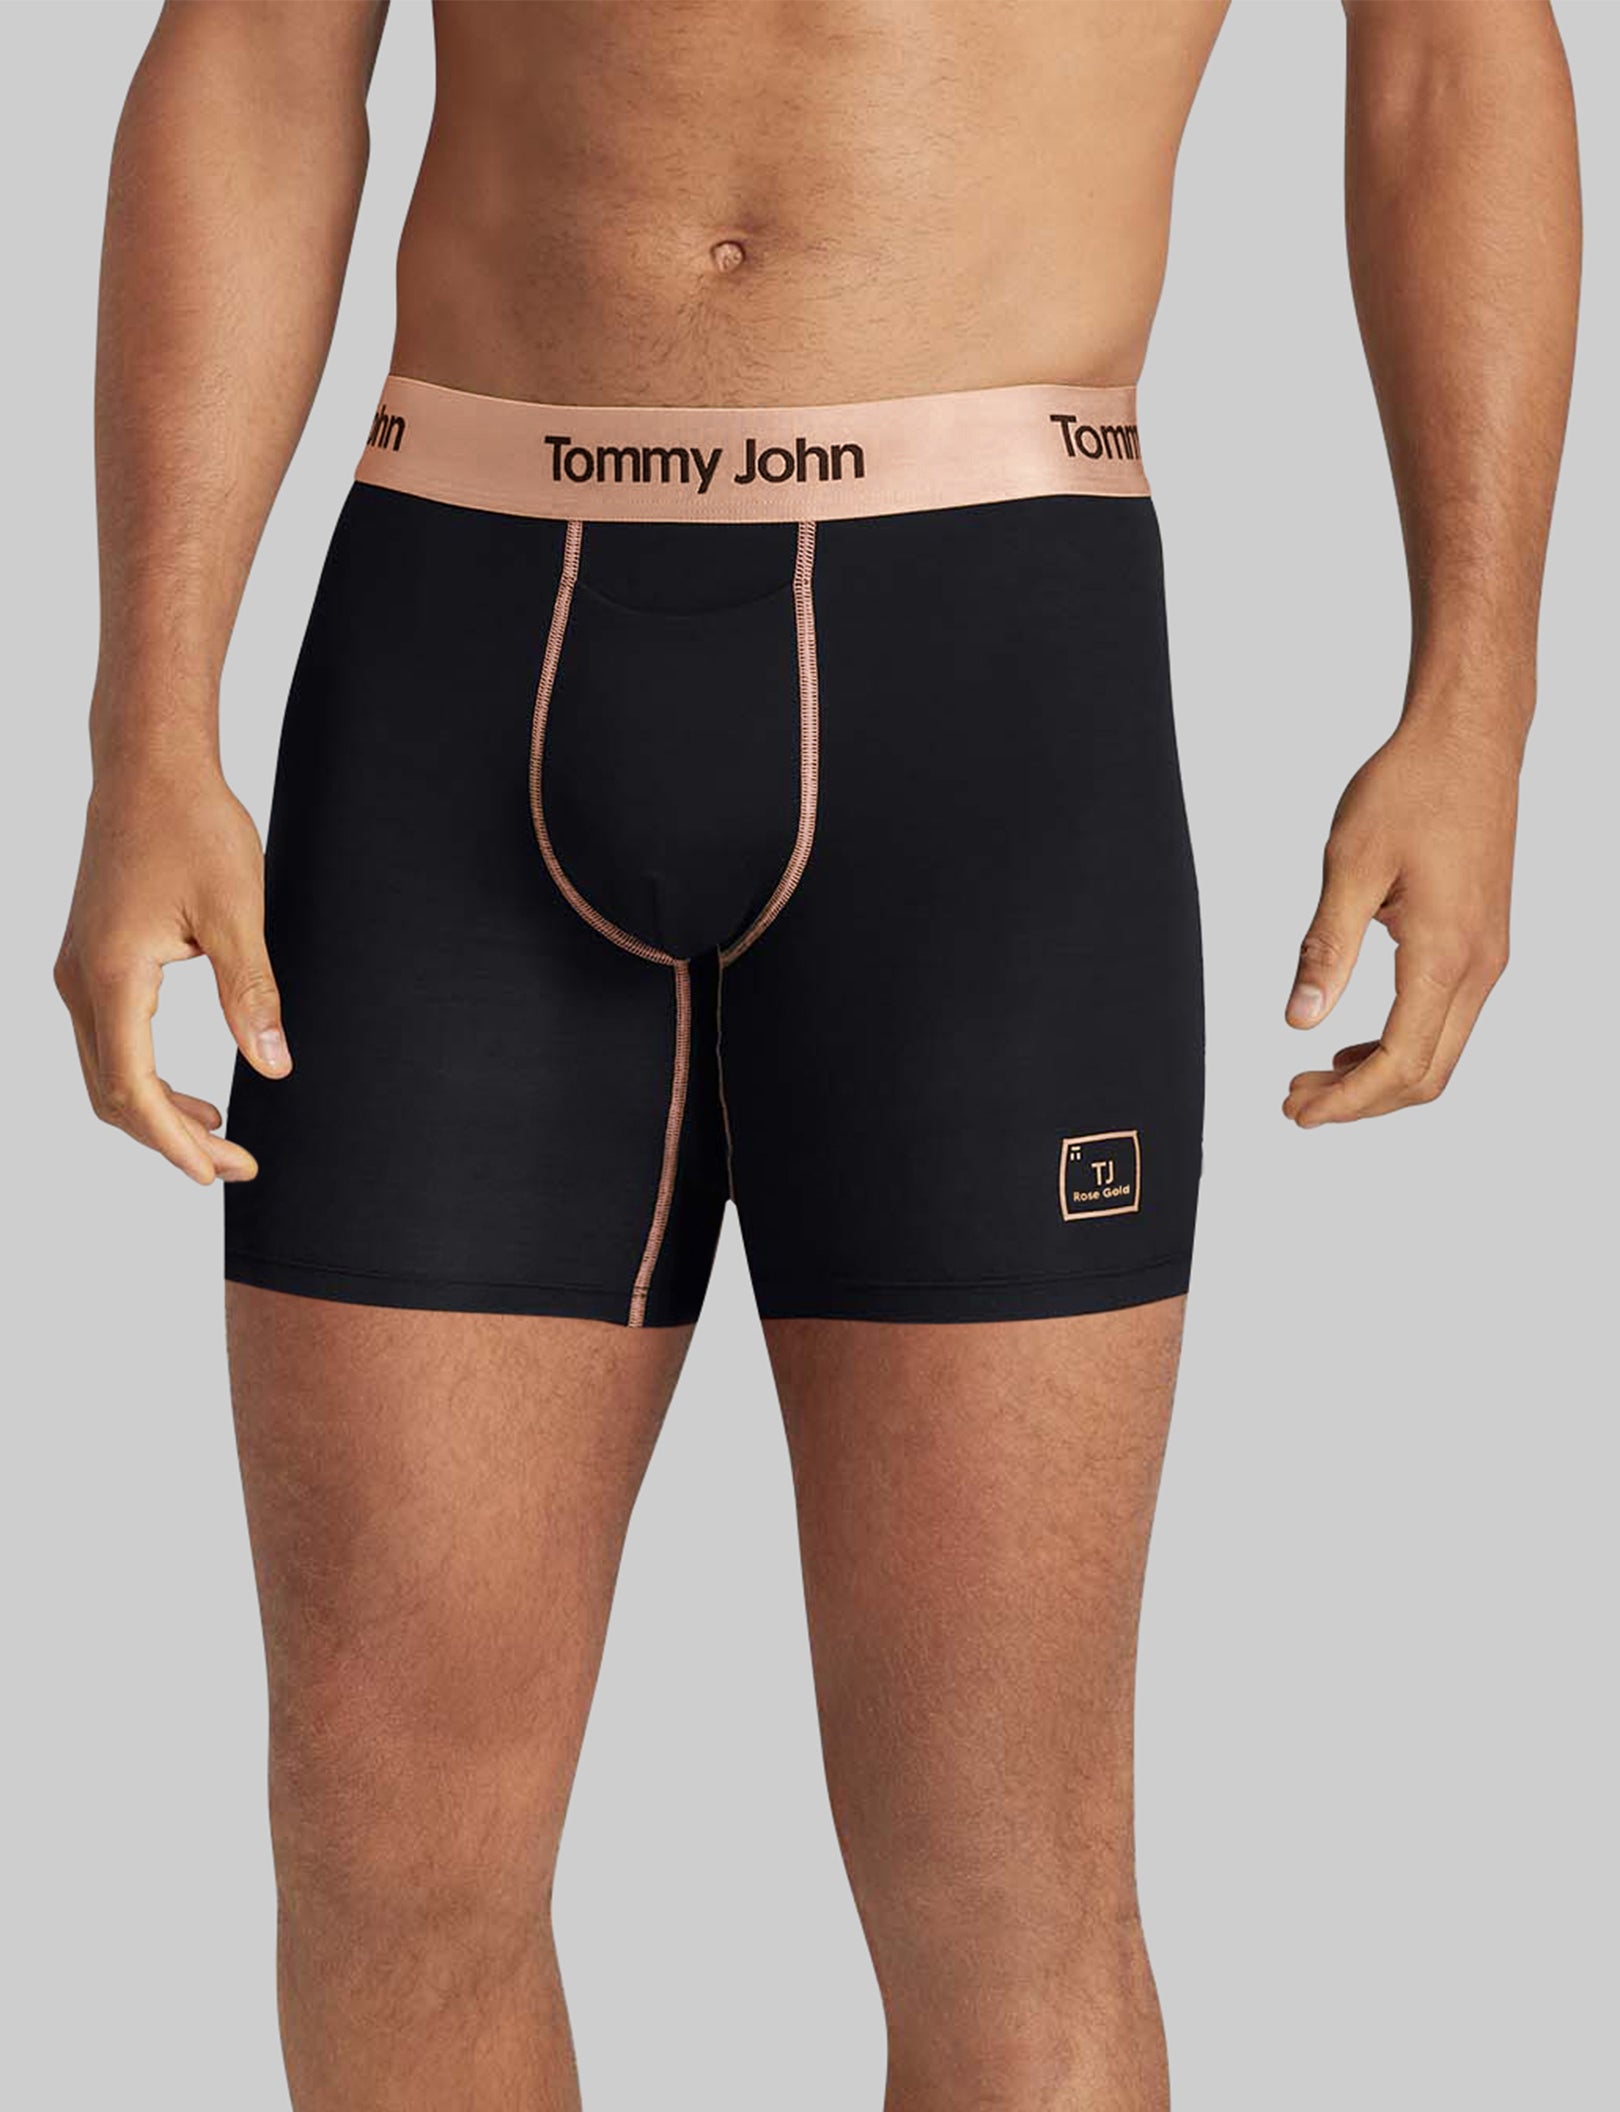 Tommy John Second Skin Mid-Length Boxer Brief 6 (-Pack